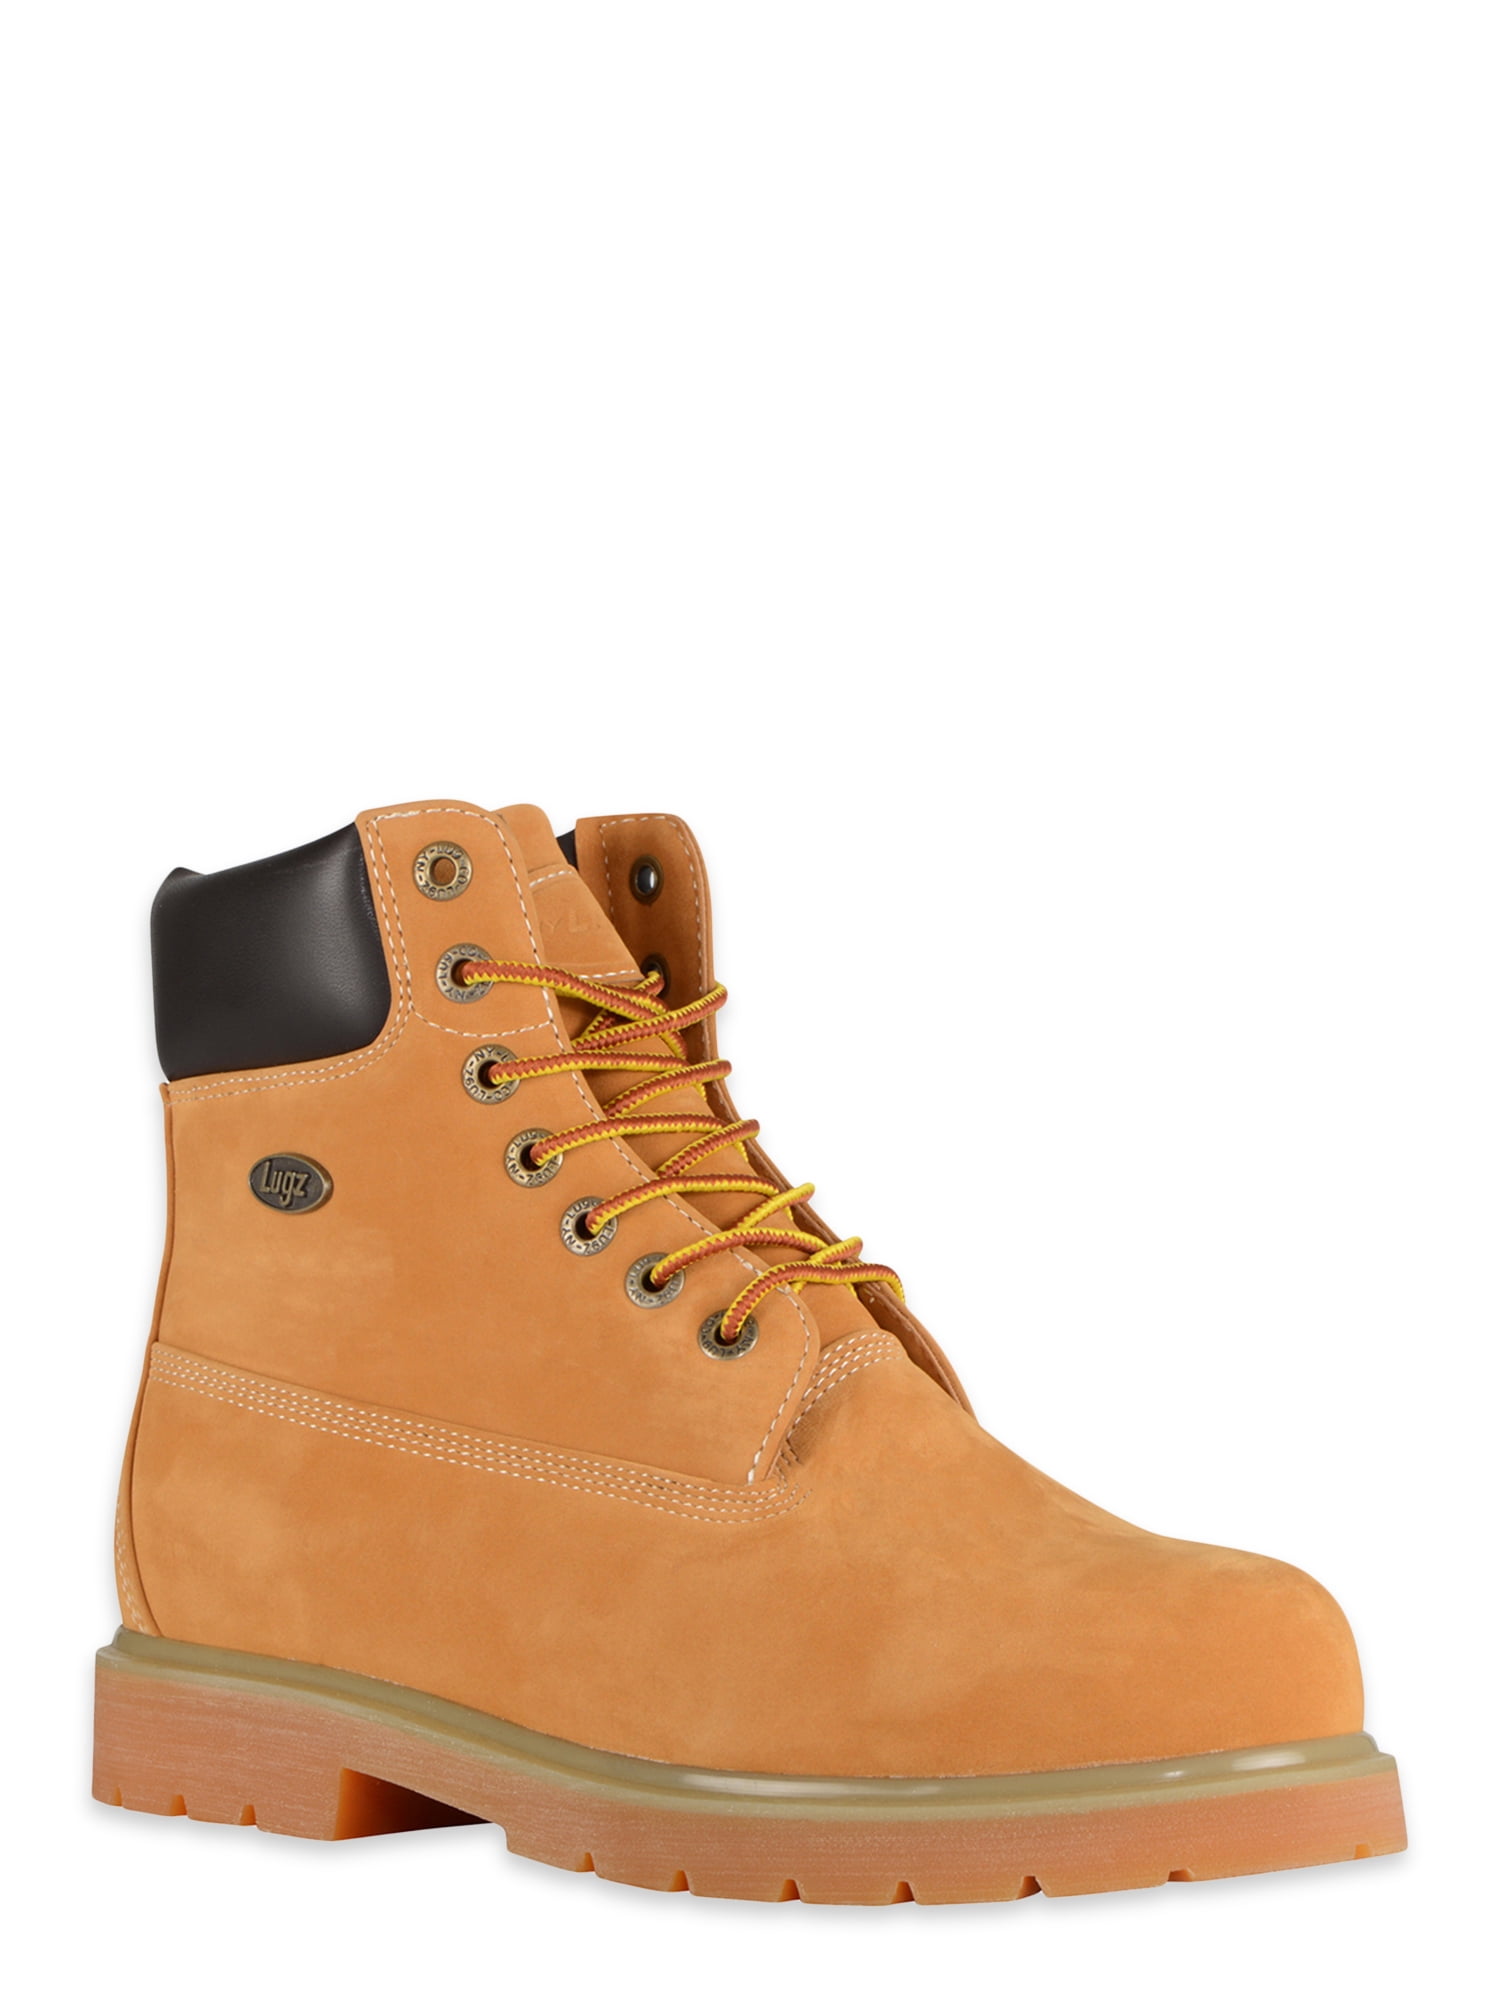 lugz mens work boots